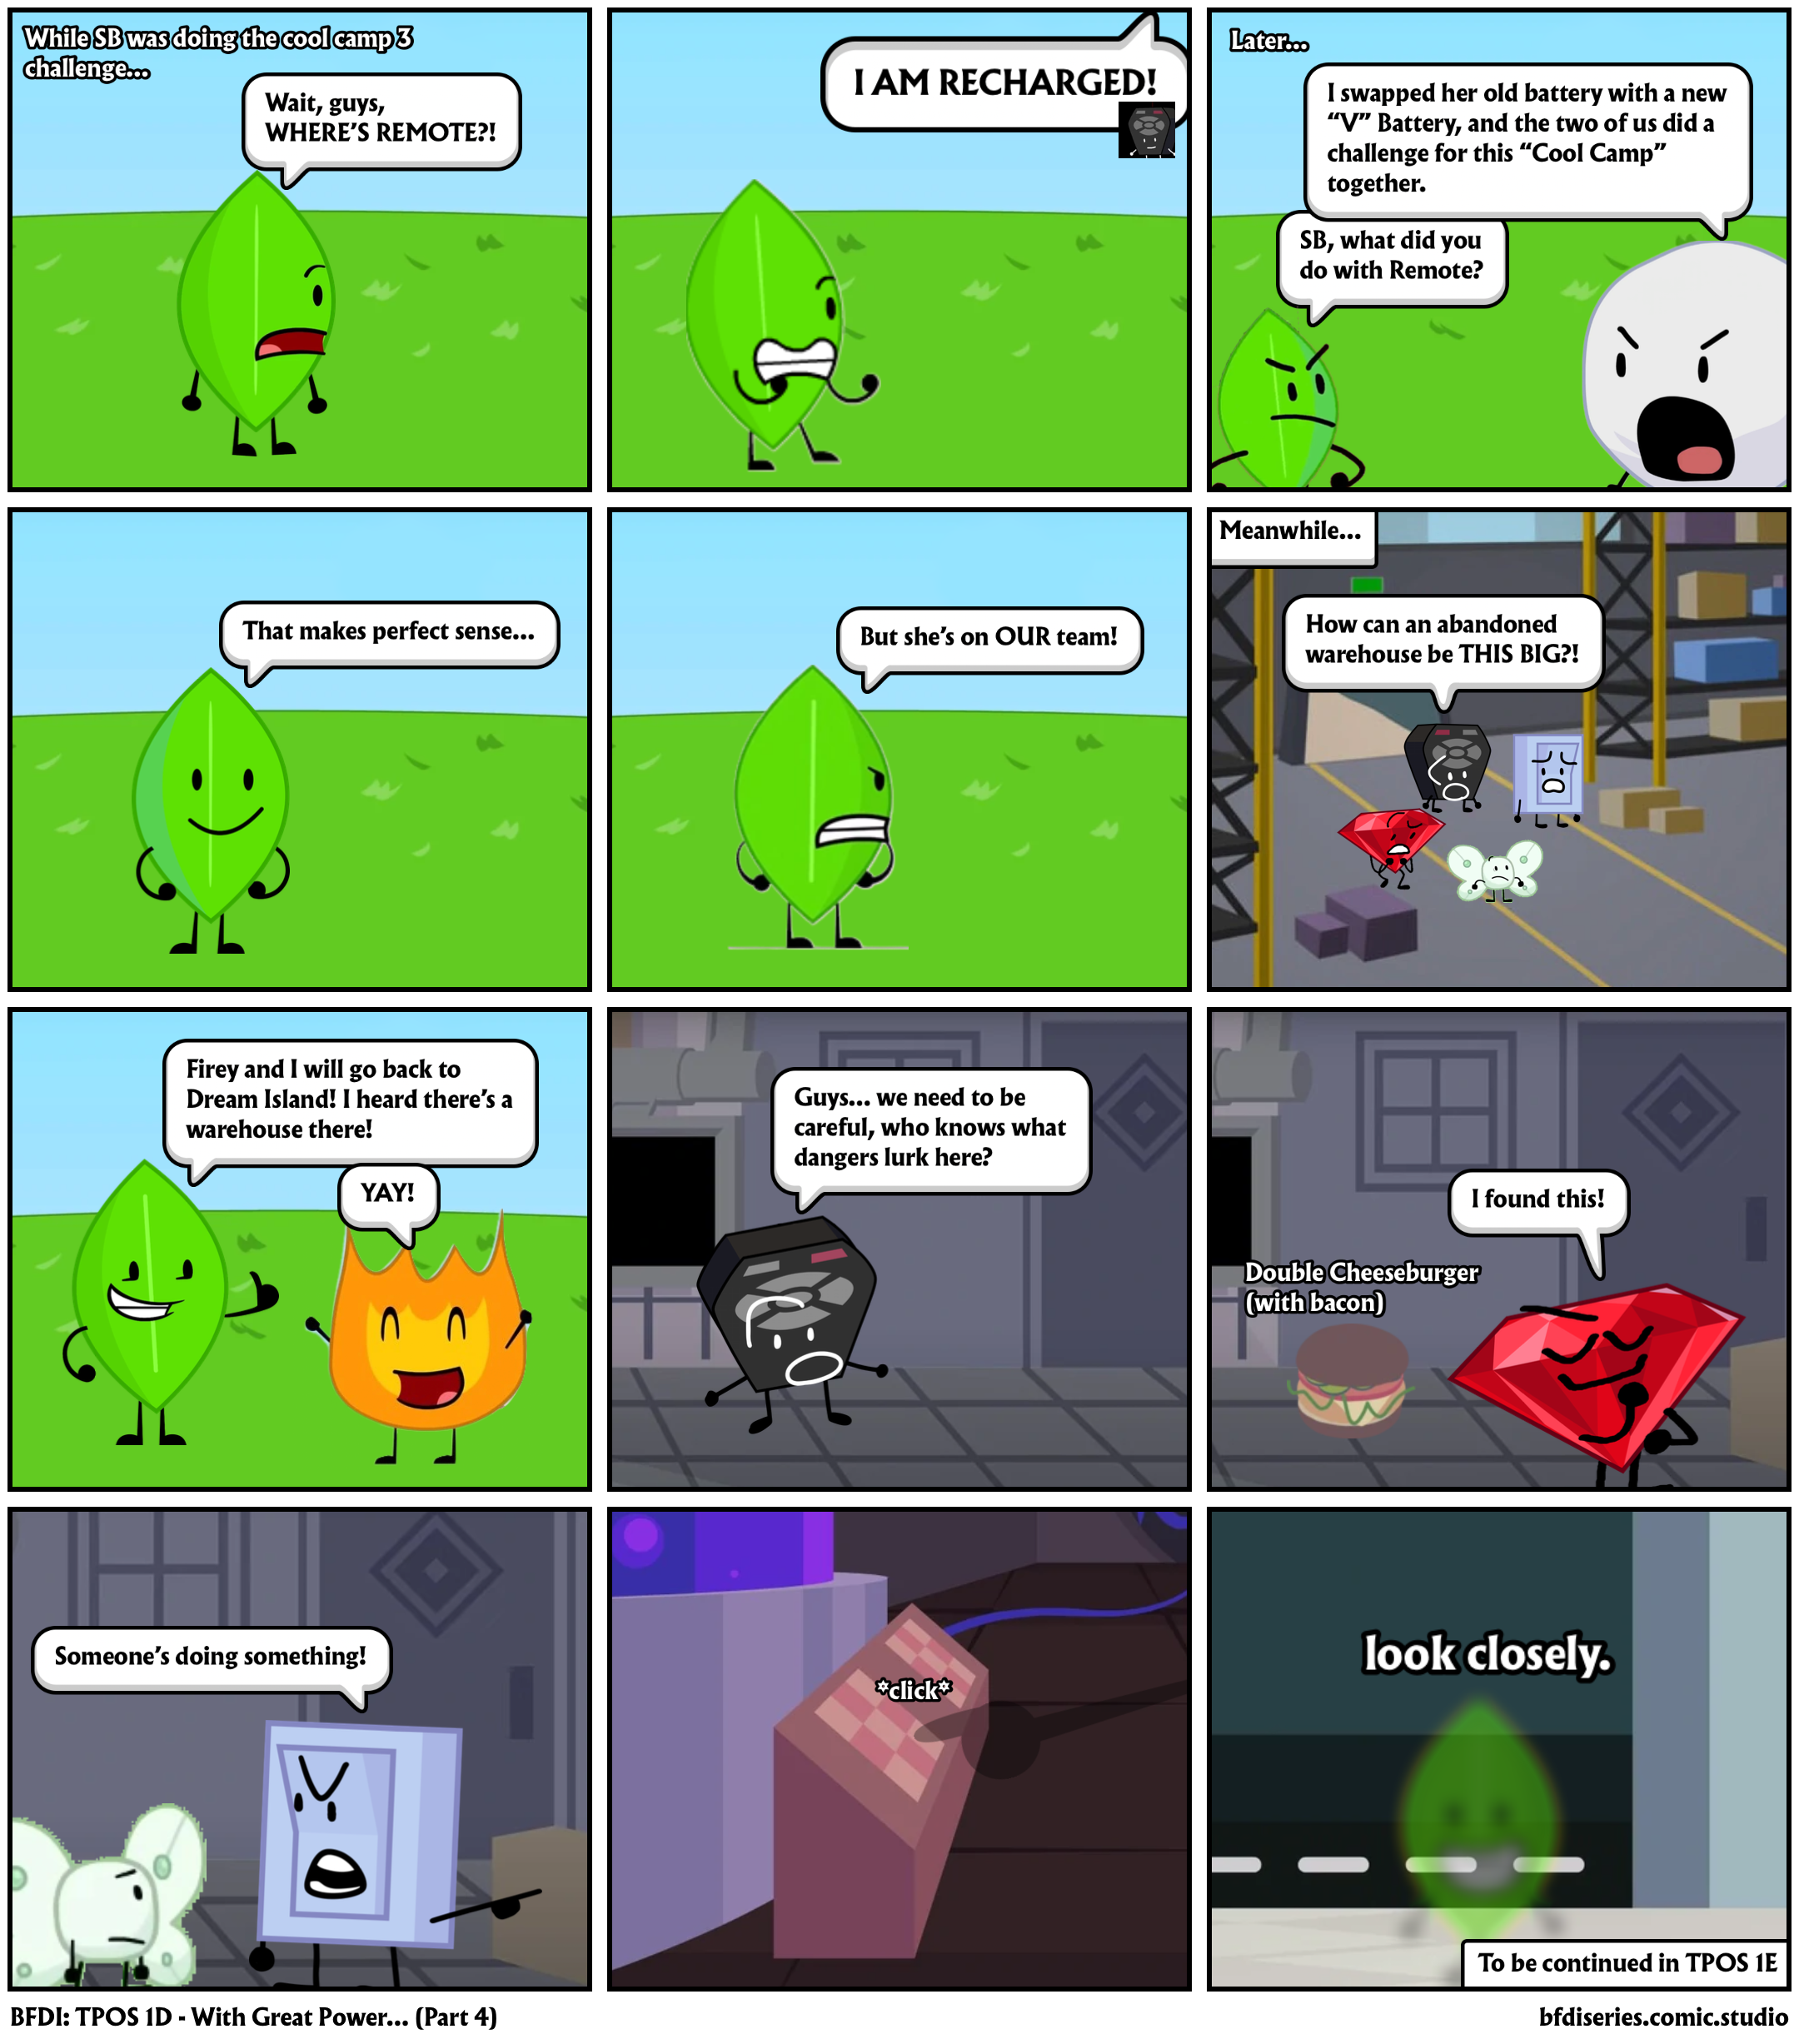 BFDI: TPOS 1D - With Great Power… (Part 4)